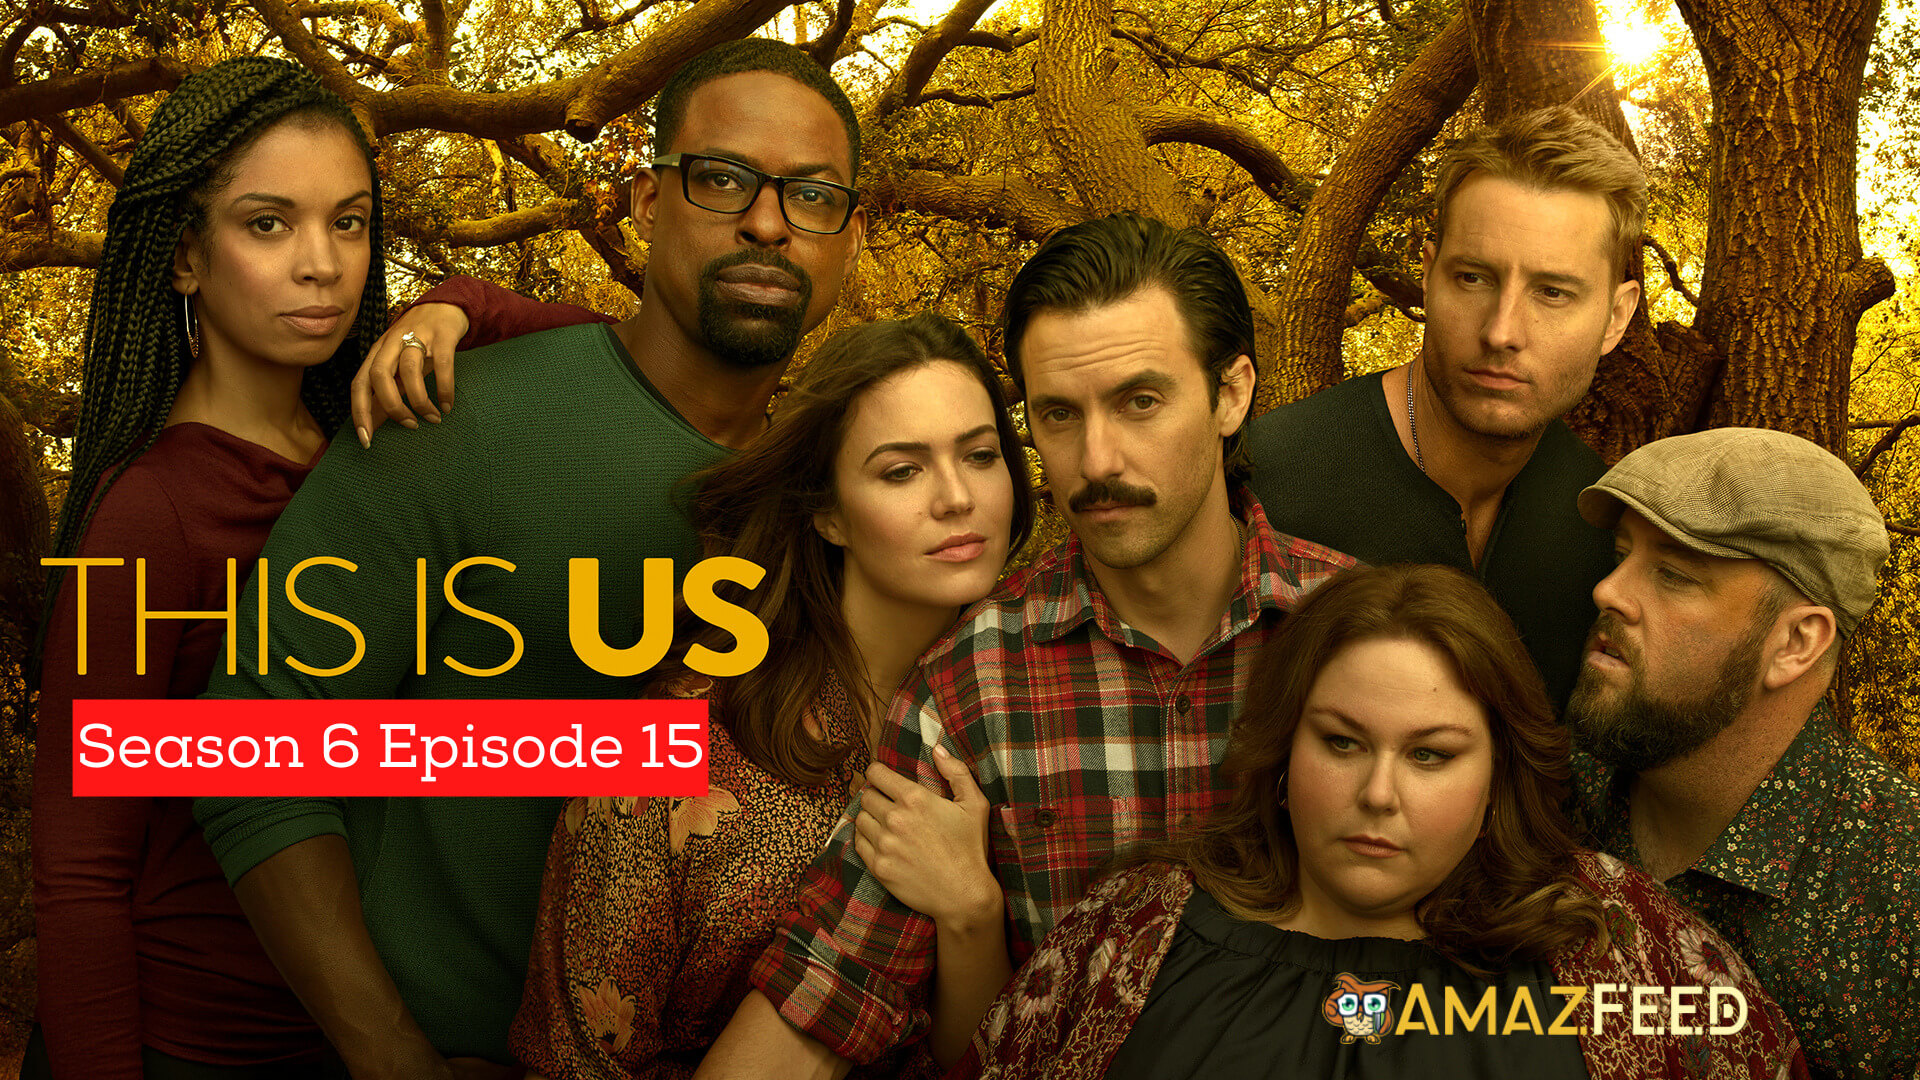 This Is Us Season 6 Episode 15 Release Date